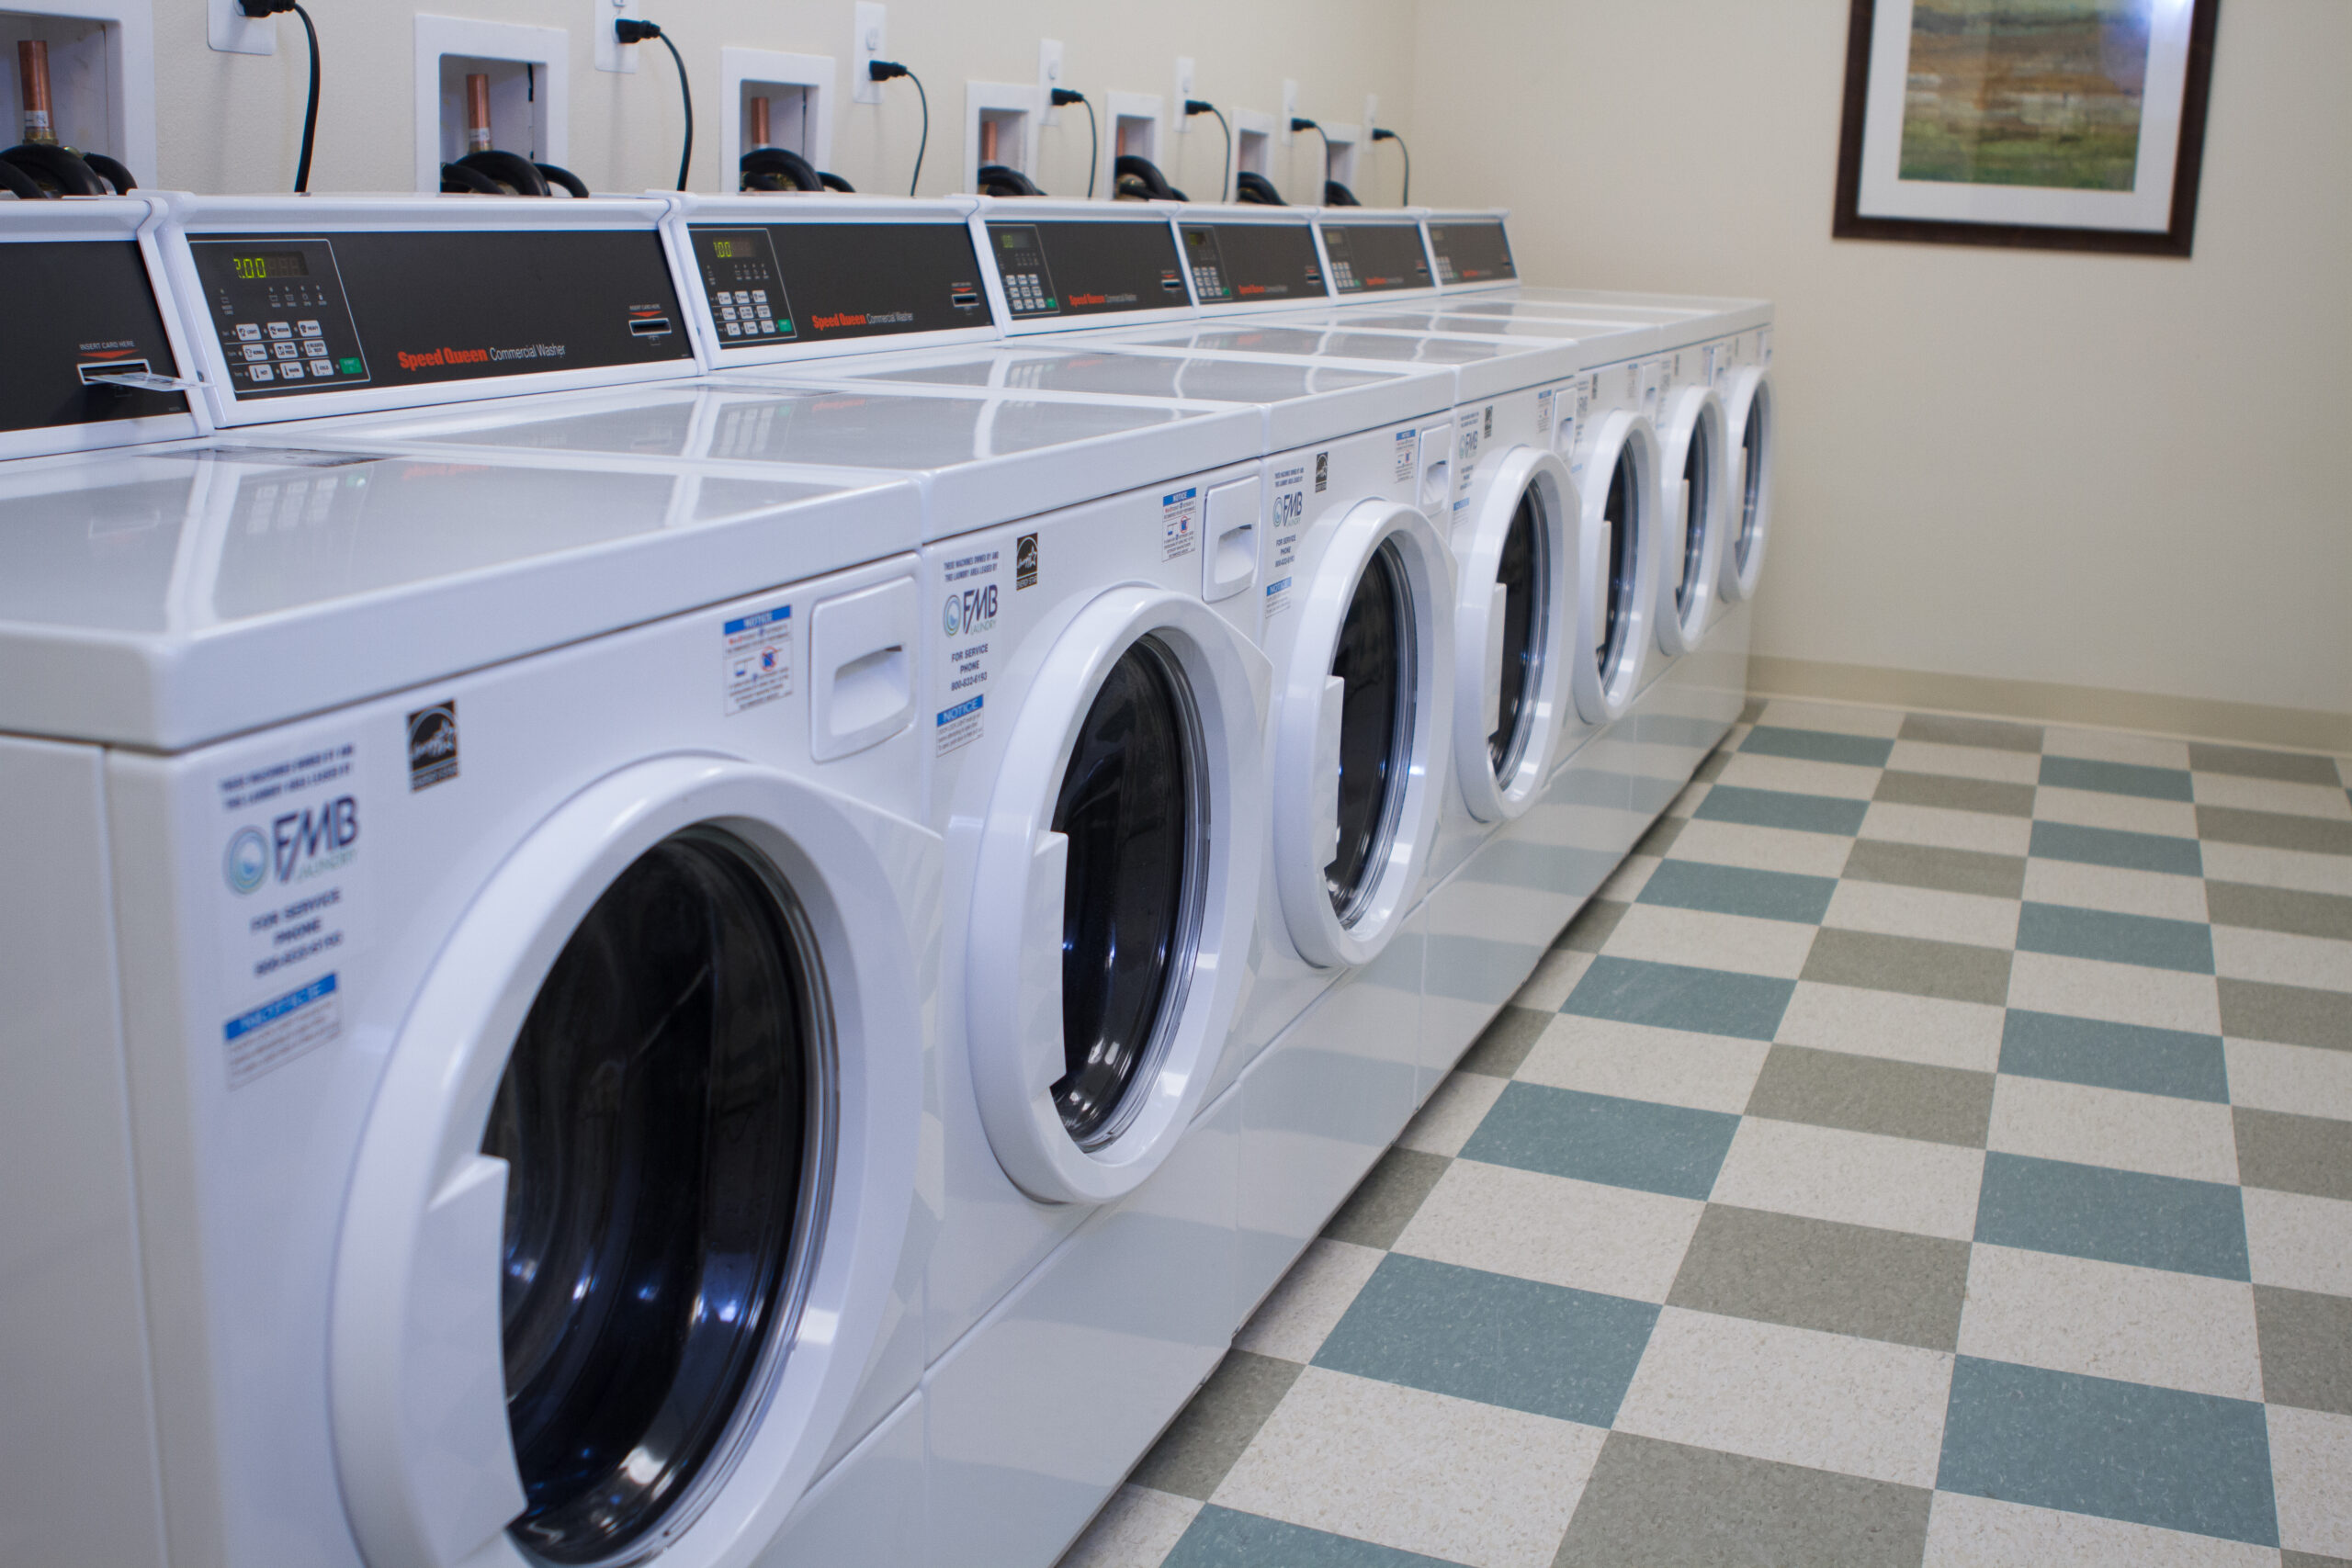 Make the Most of On-Premises Laundry Space